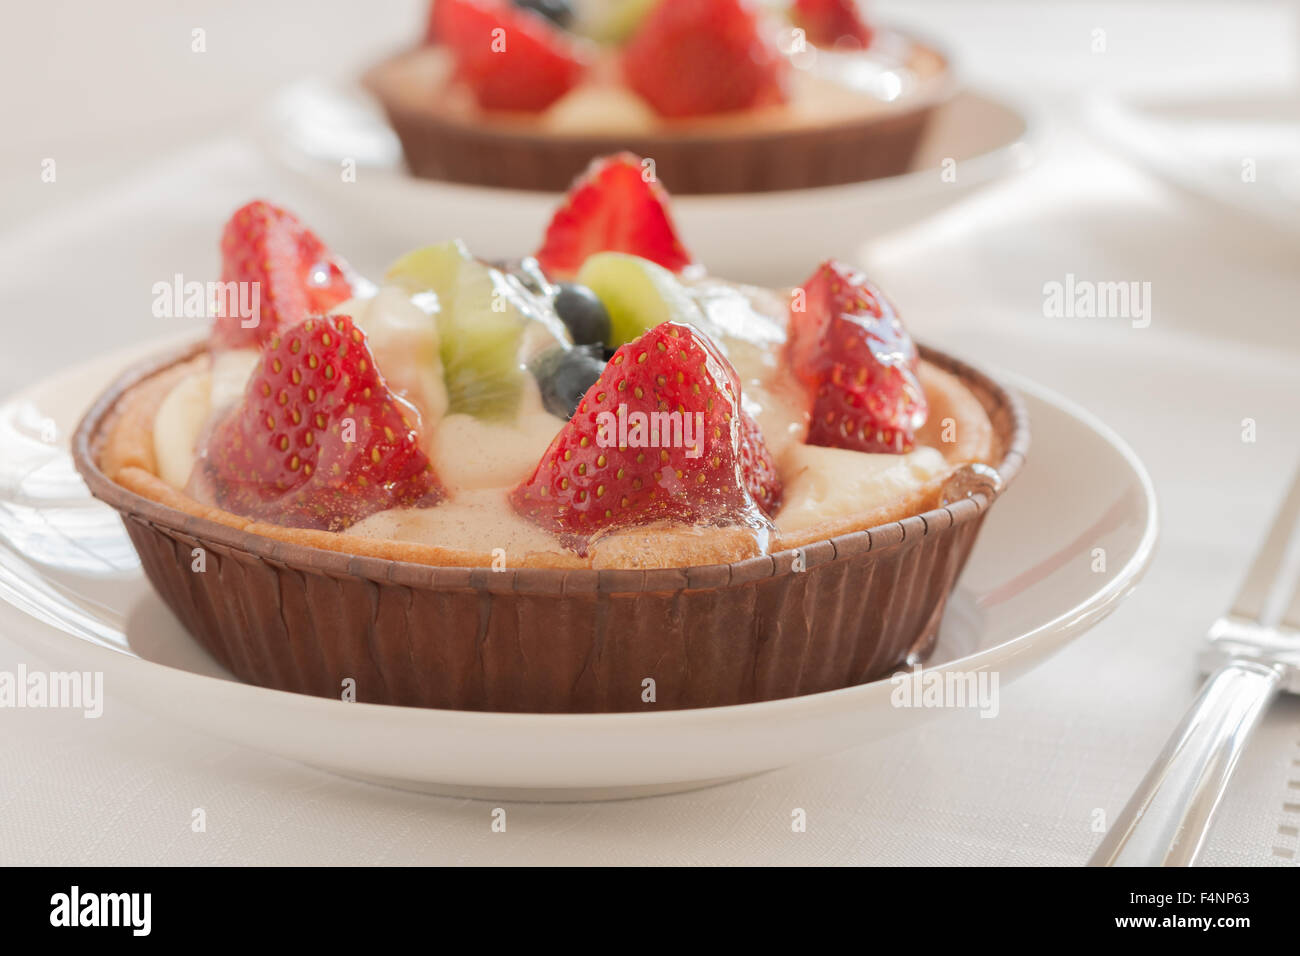 Fruit tarts made filled with creme patissiere strawberries kiwi fruit and blueberries Stock Photo